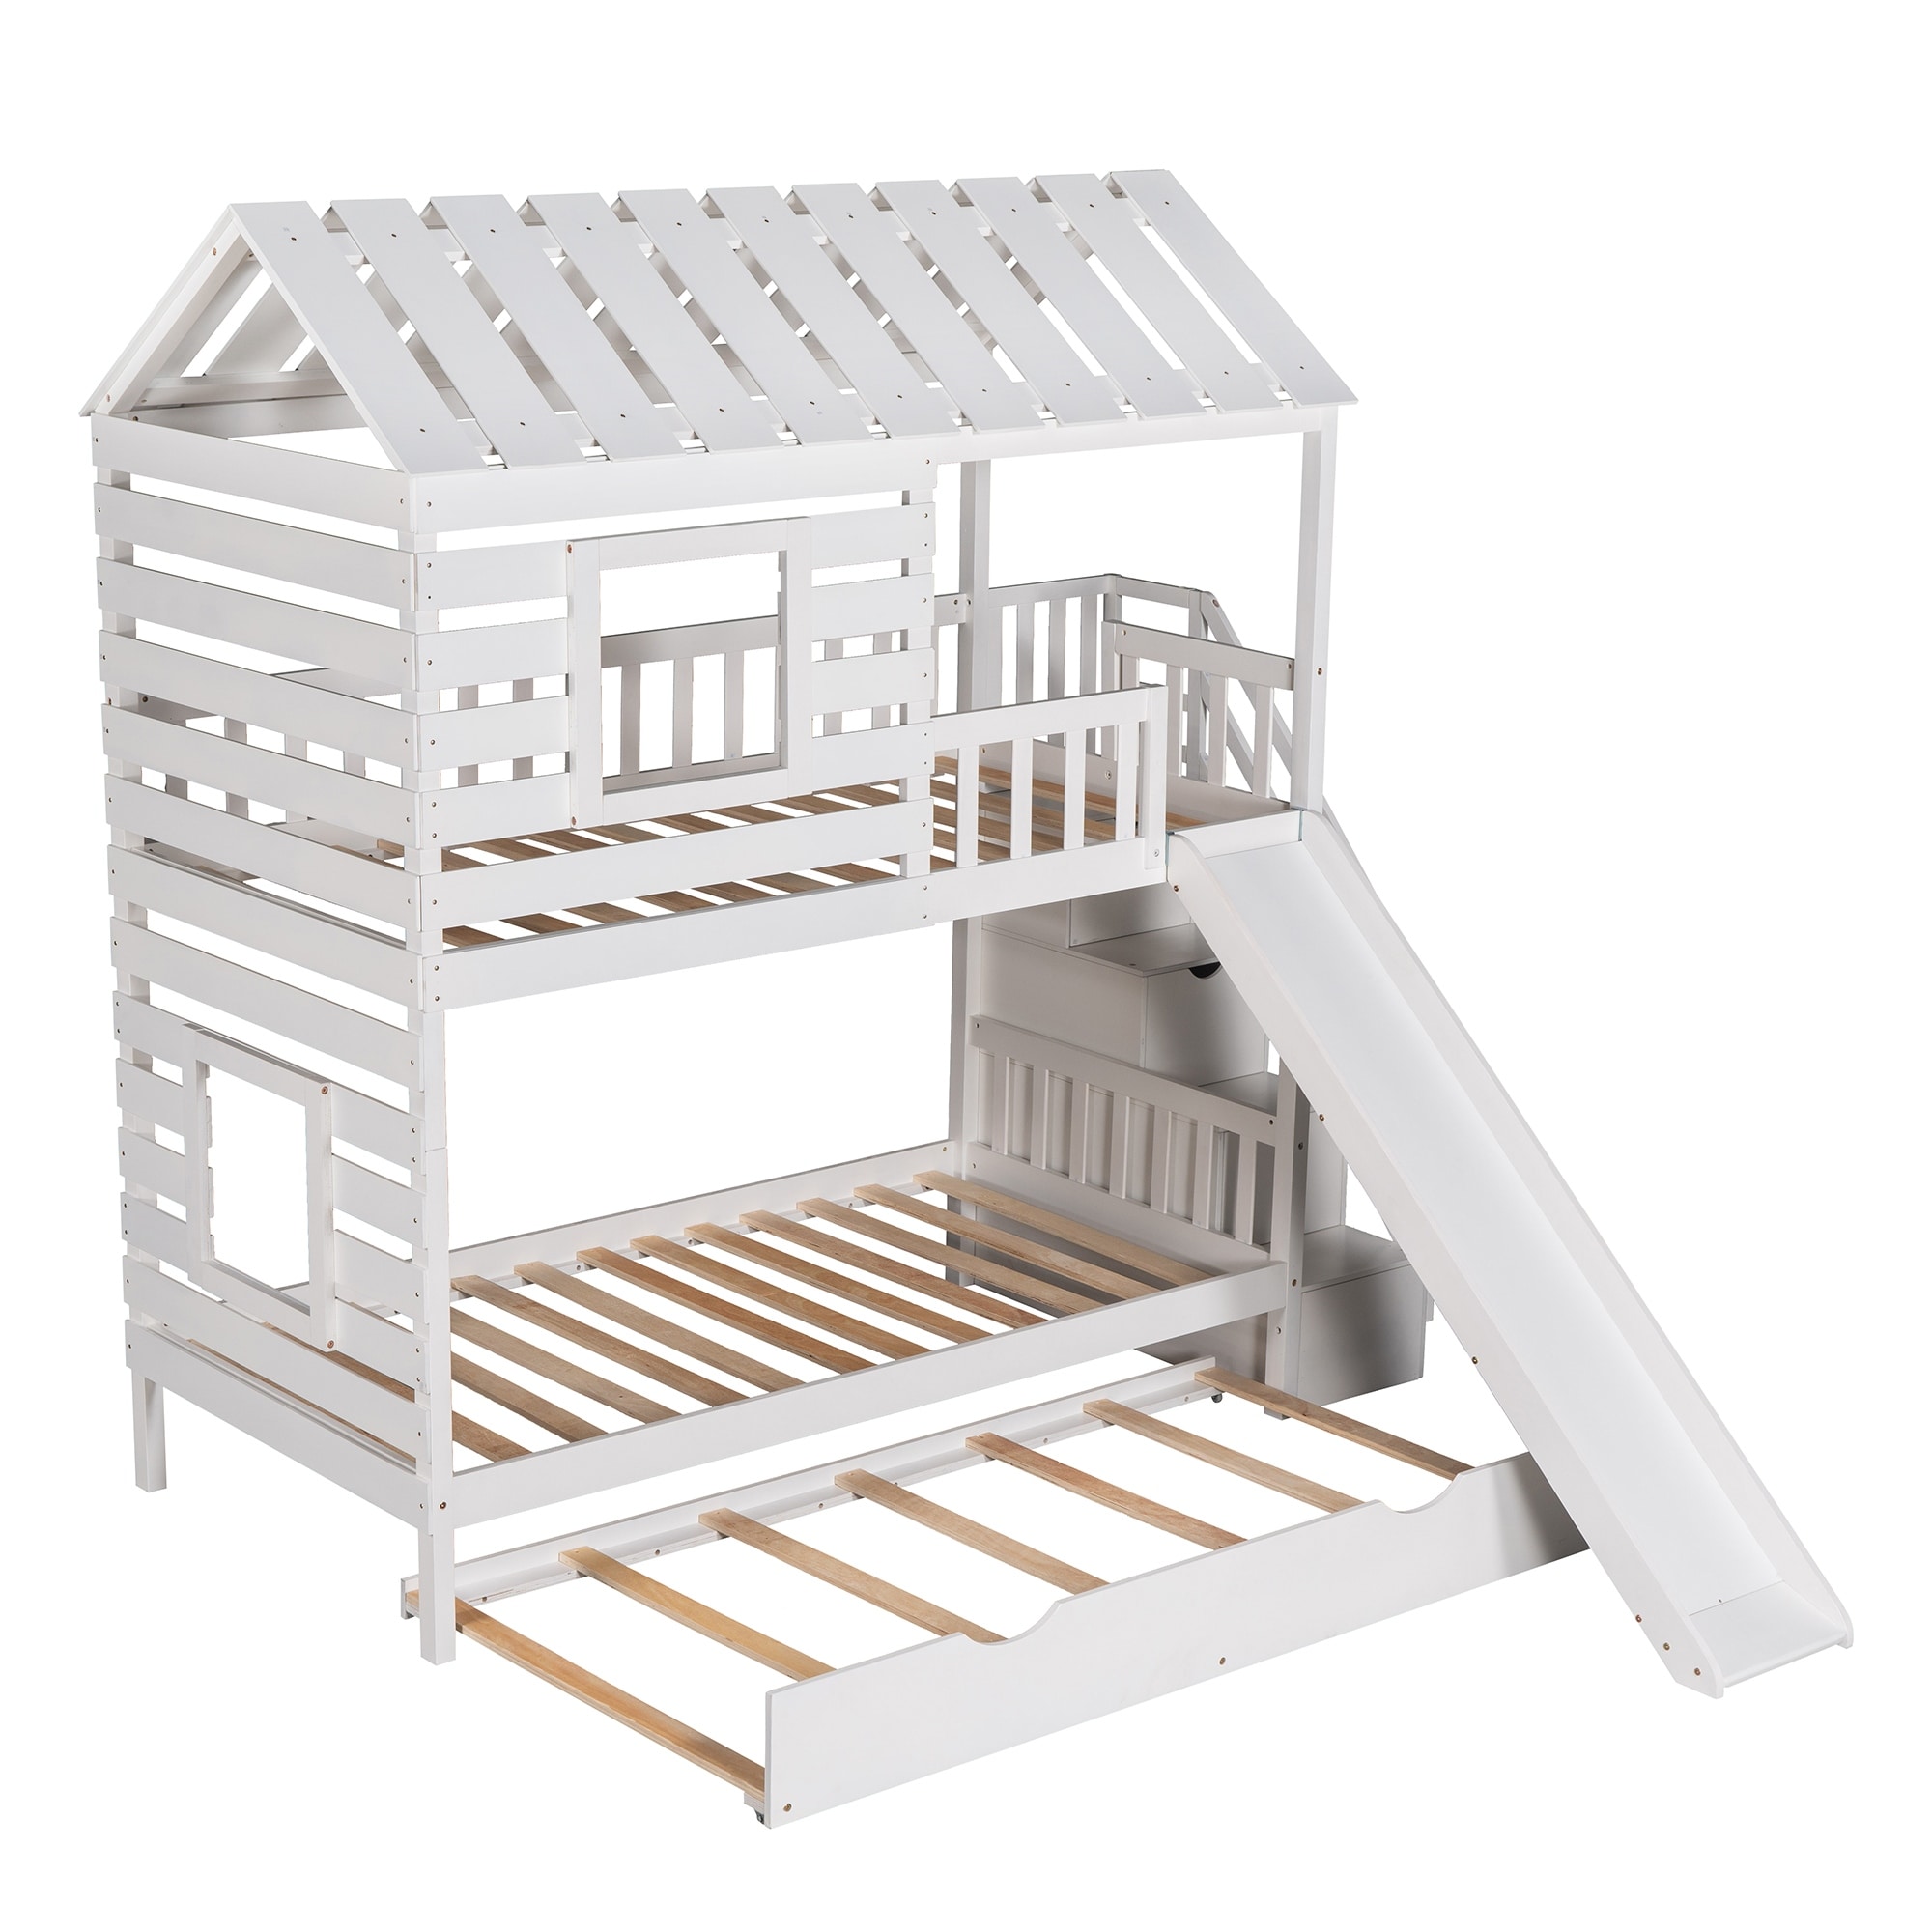 Twin over Twin White House Bunk Bed with Trundle and Slide, Storage Staircase, Roof and Window Design Suitable for Bedroom